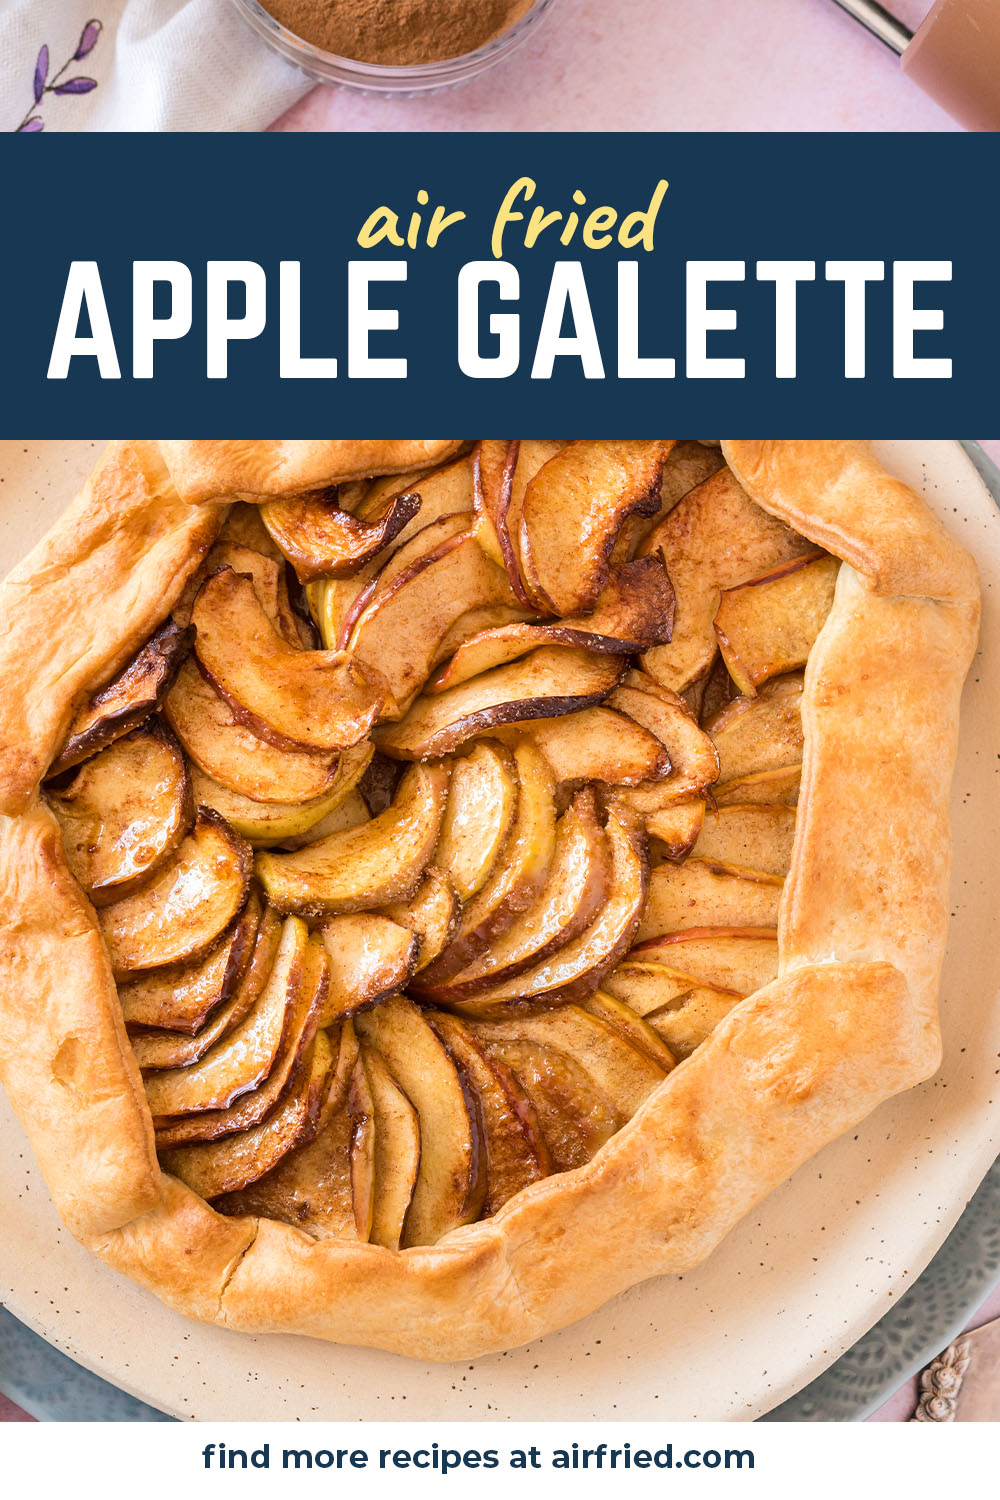 Apple galette is very similar to an apple tart.  It is a sweet apple filling surrounded by an open face pie crust!